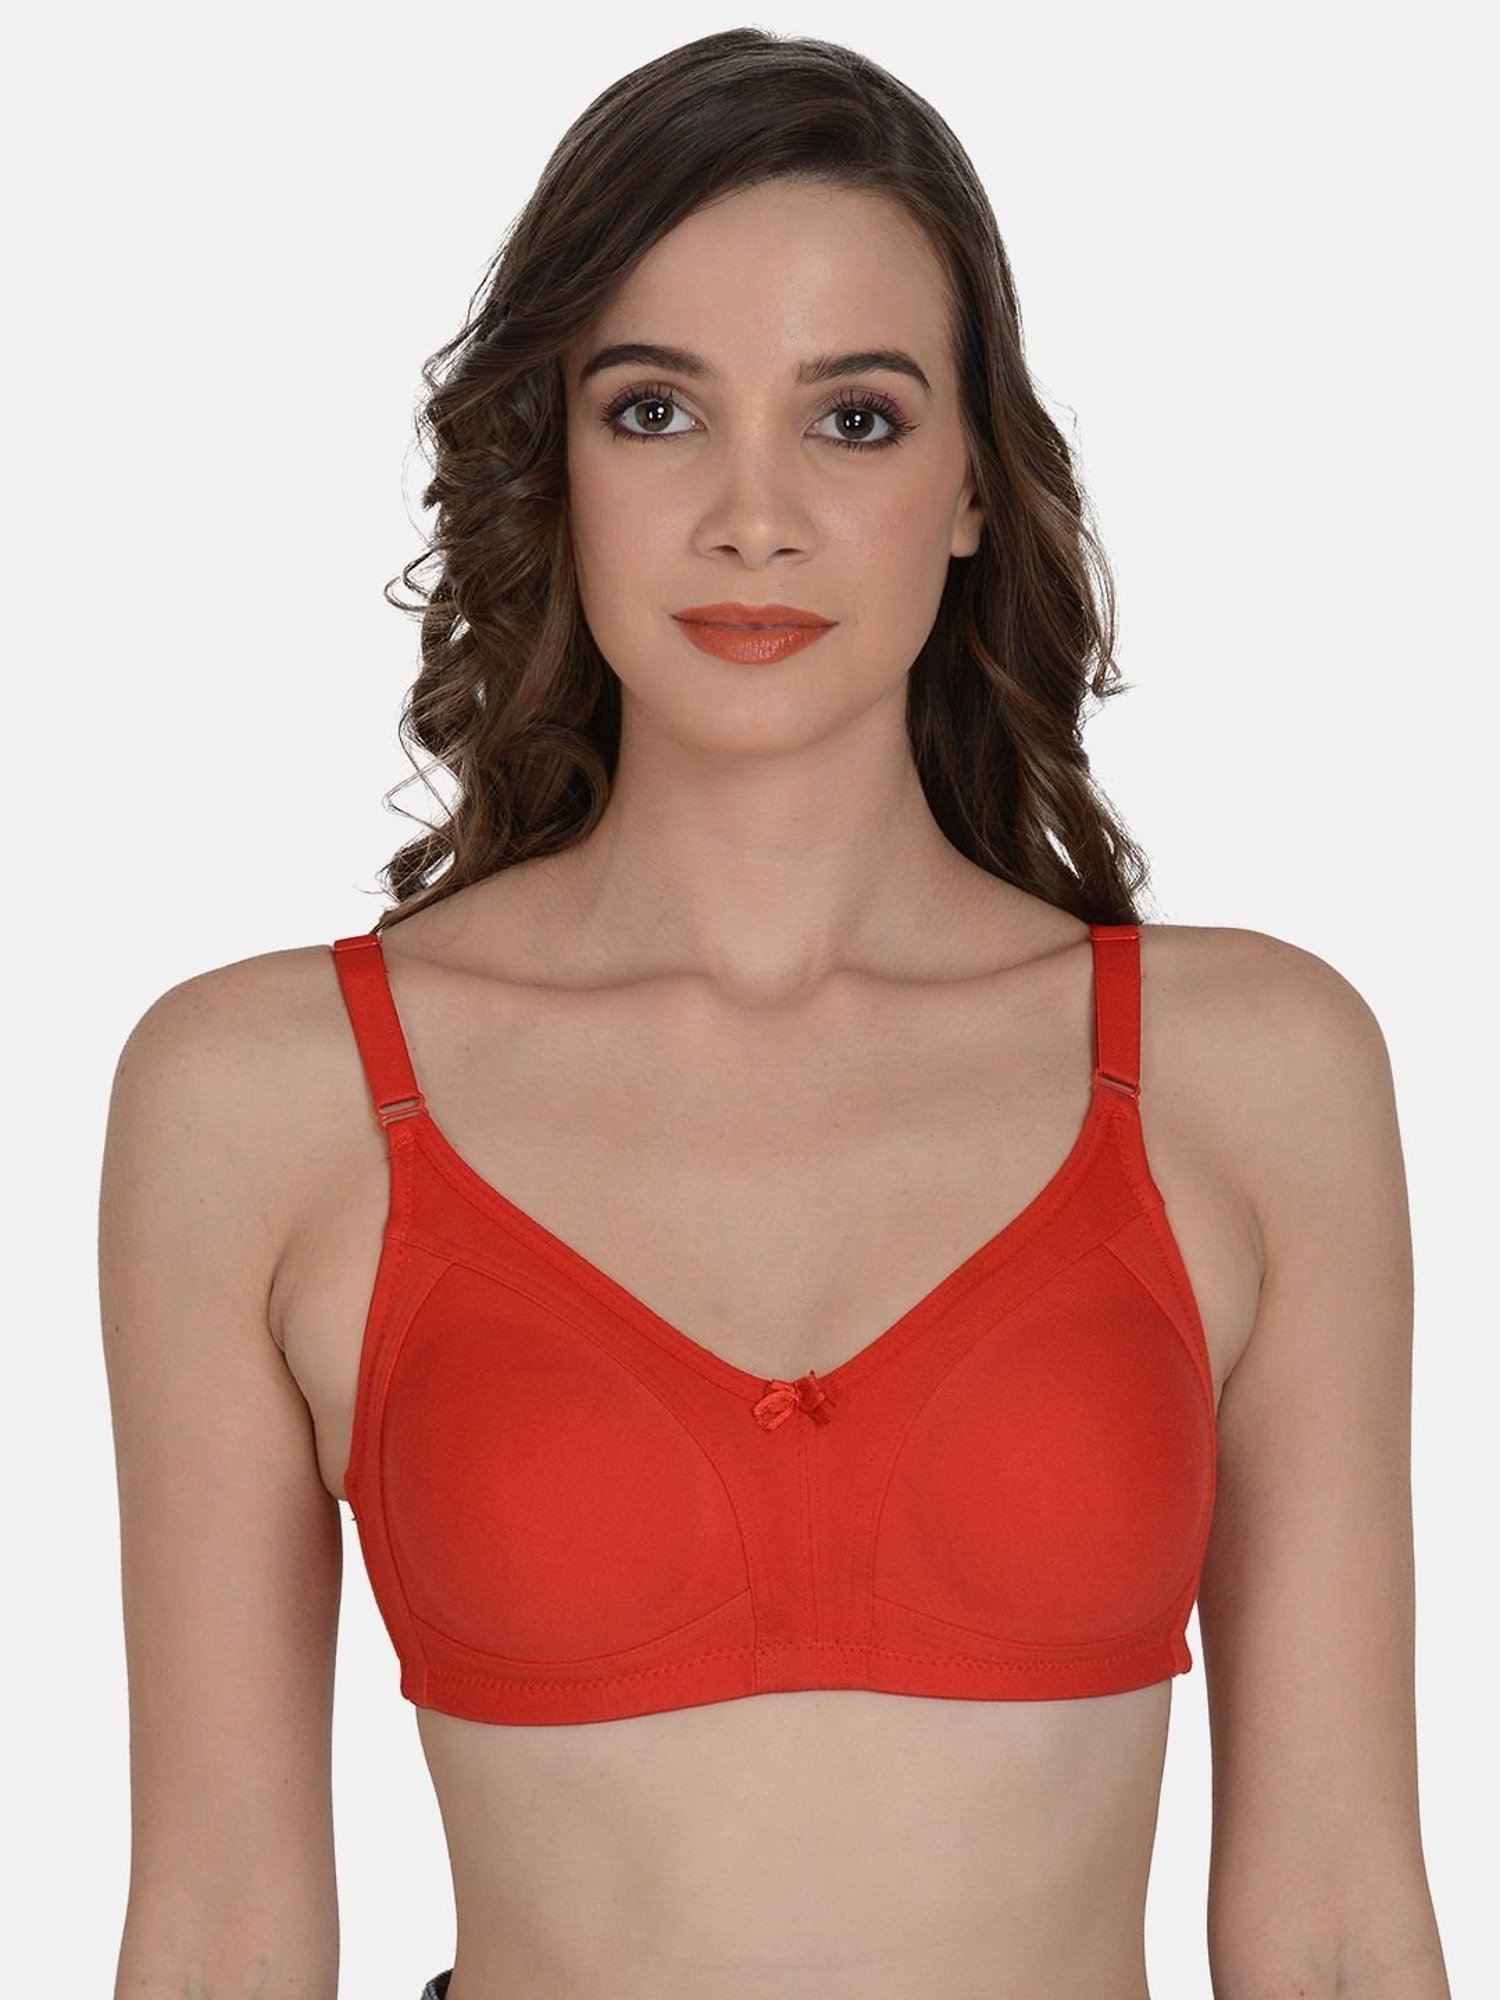 Buy online Blue Cotton Tshirt Bra from lingerie for Women by Zivame for  ₹389 at 40% off